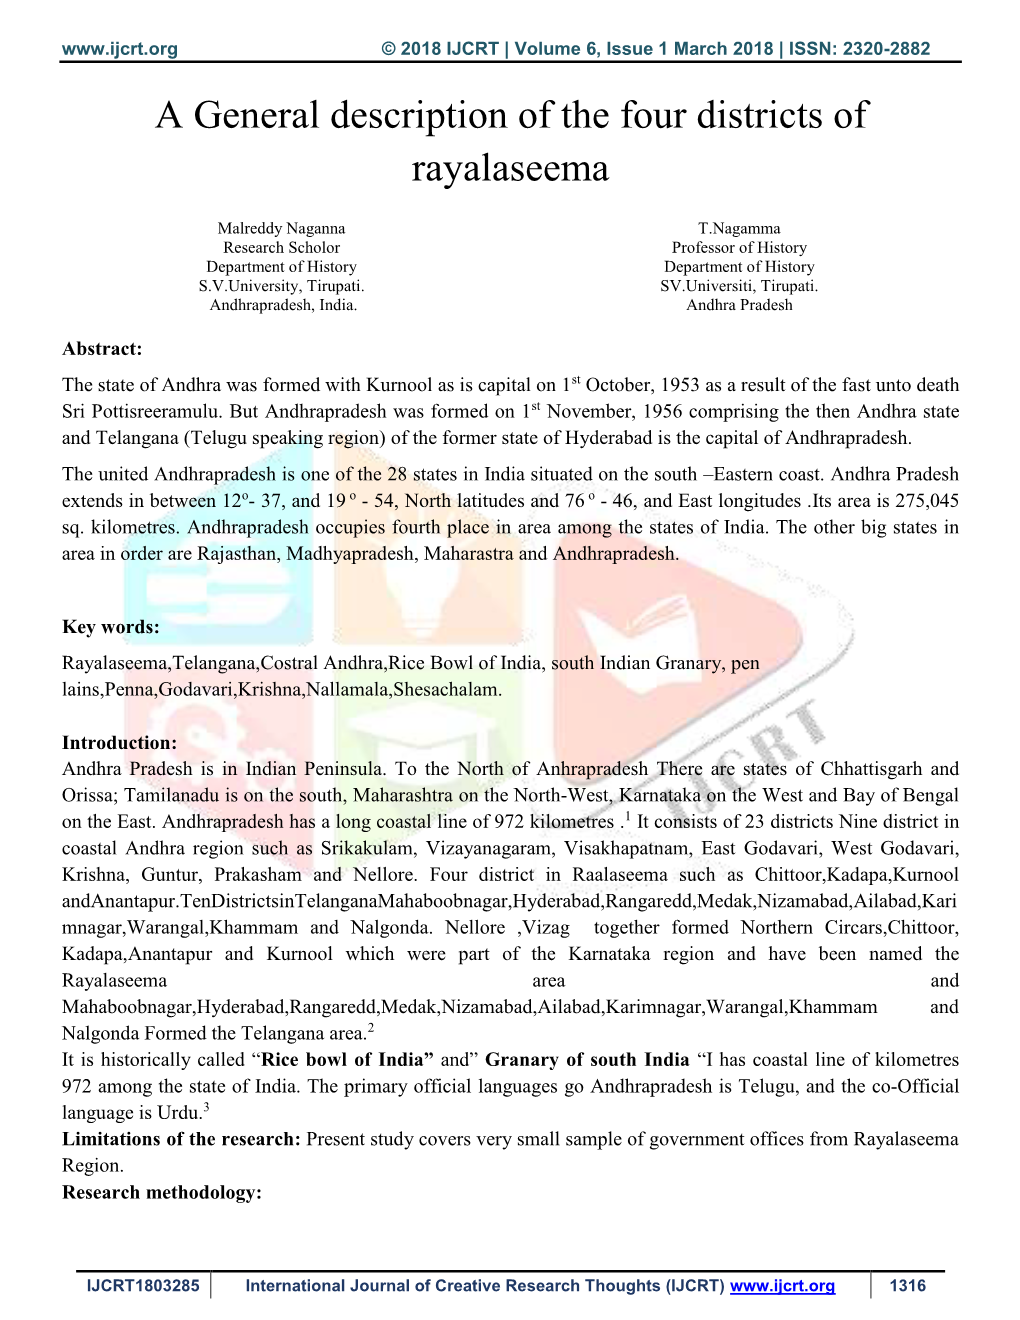 A General Description of the Four Districts of Rayalaseema